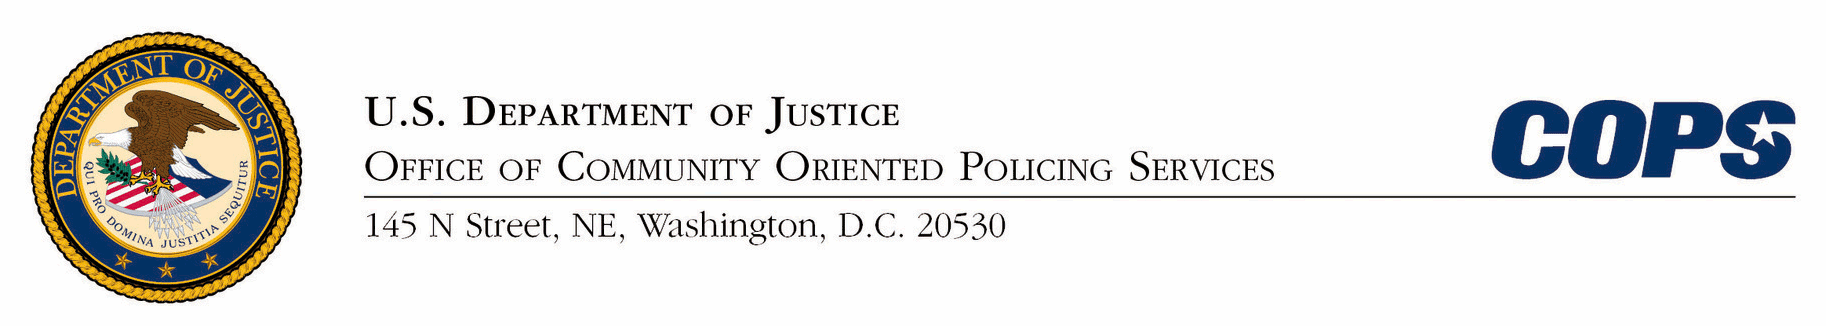 U.S. Department of Justice Office of Community Oriented Policing Services logo and letterhead